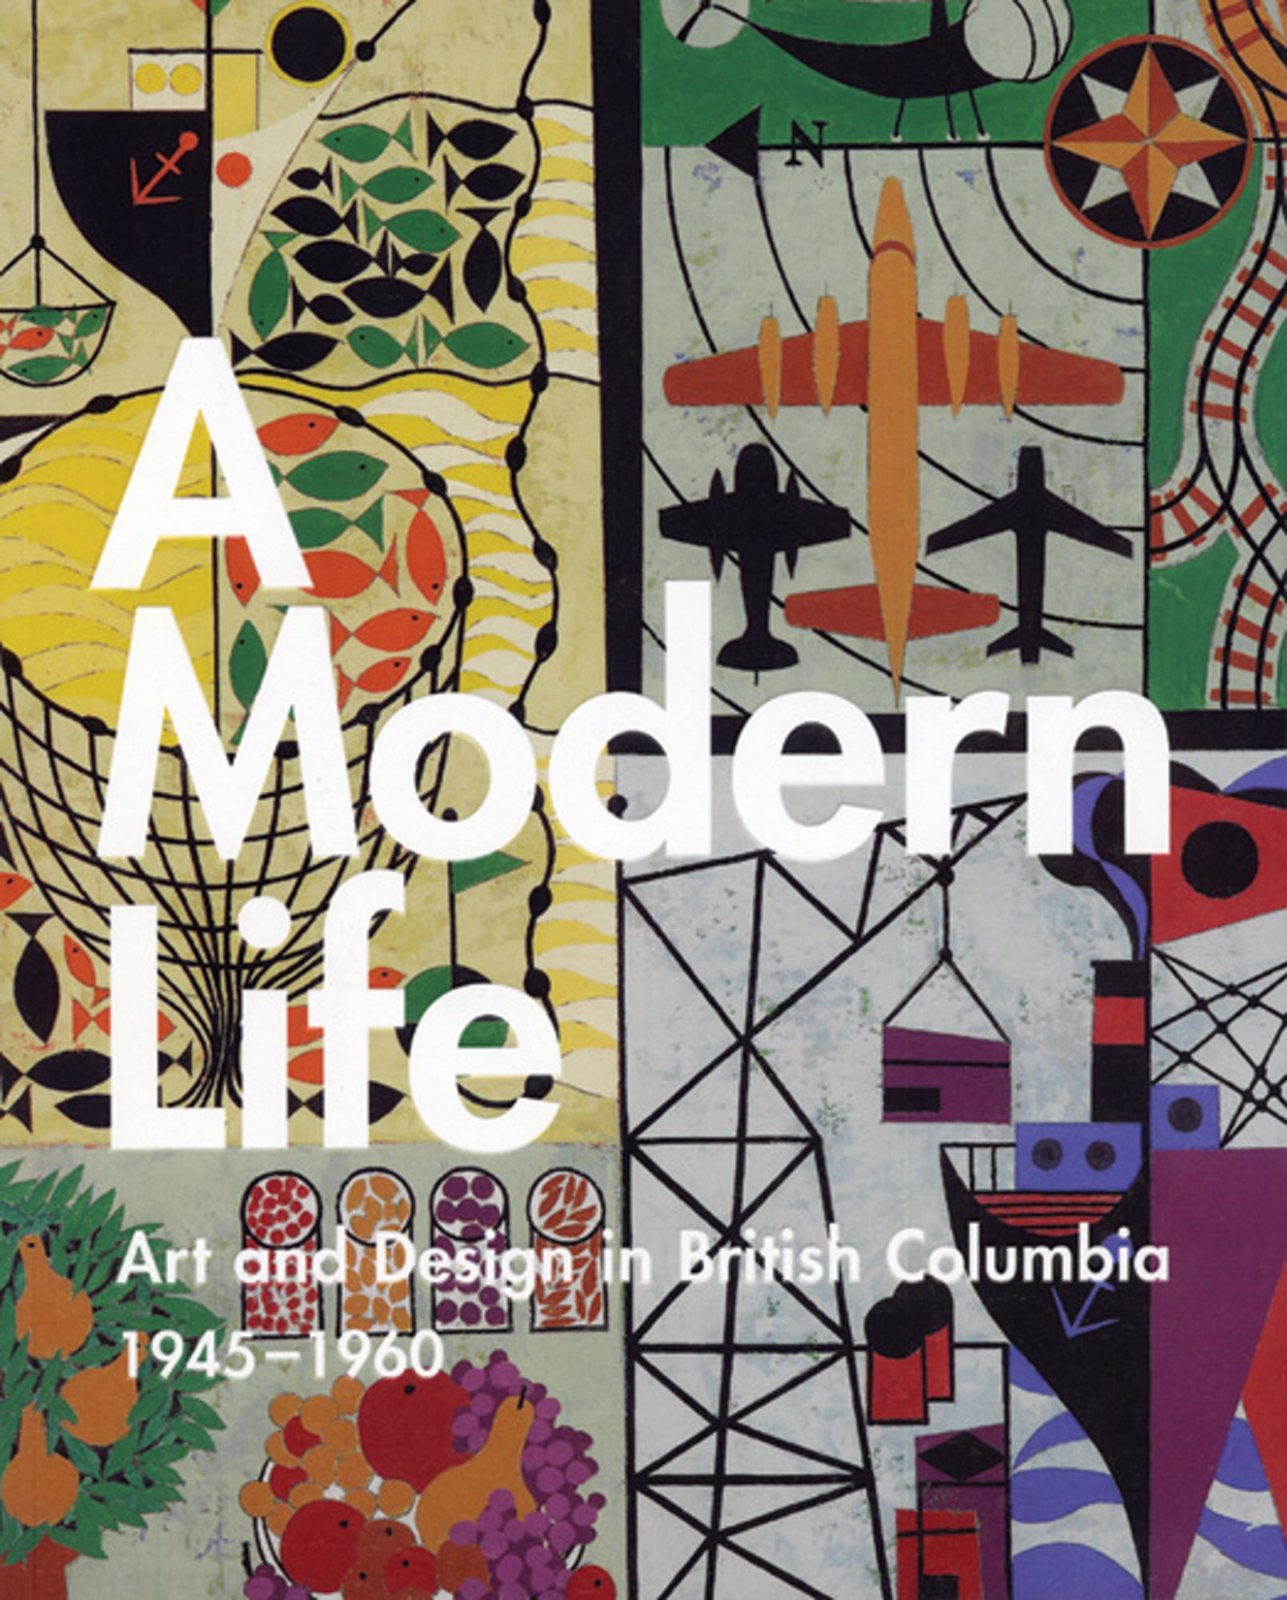 A Modern Life: Art and Design in BC 1945-1960